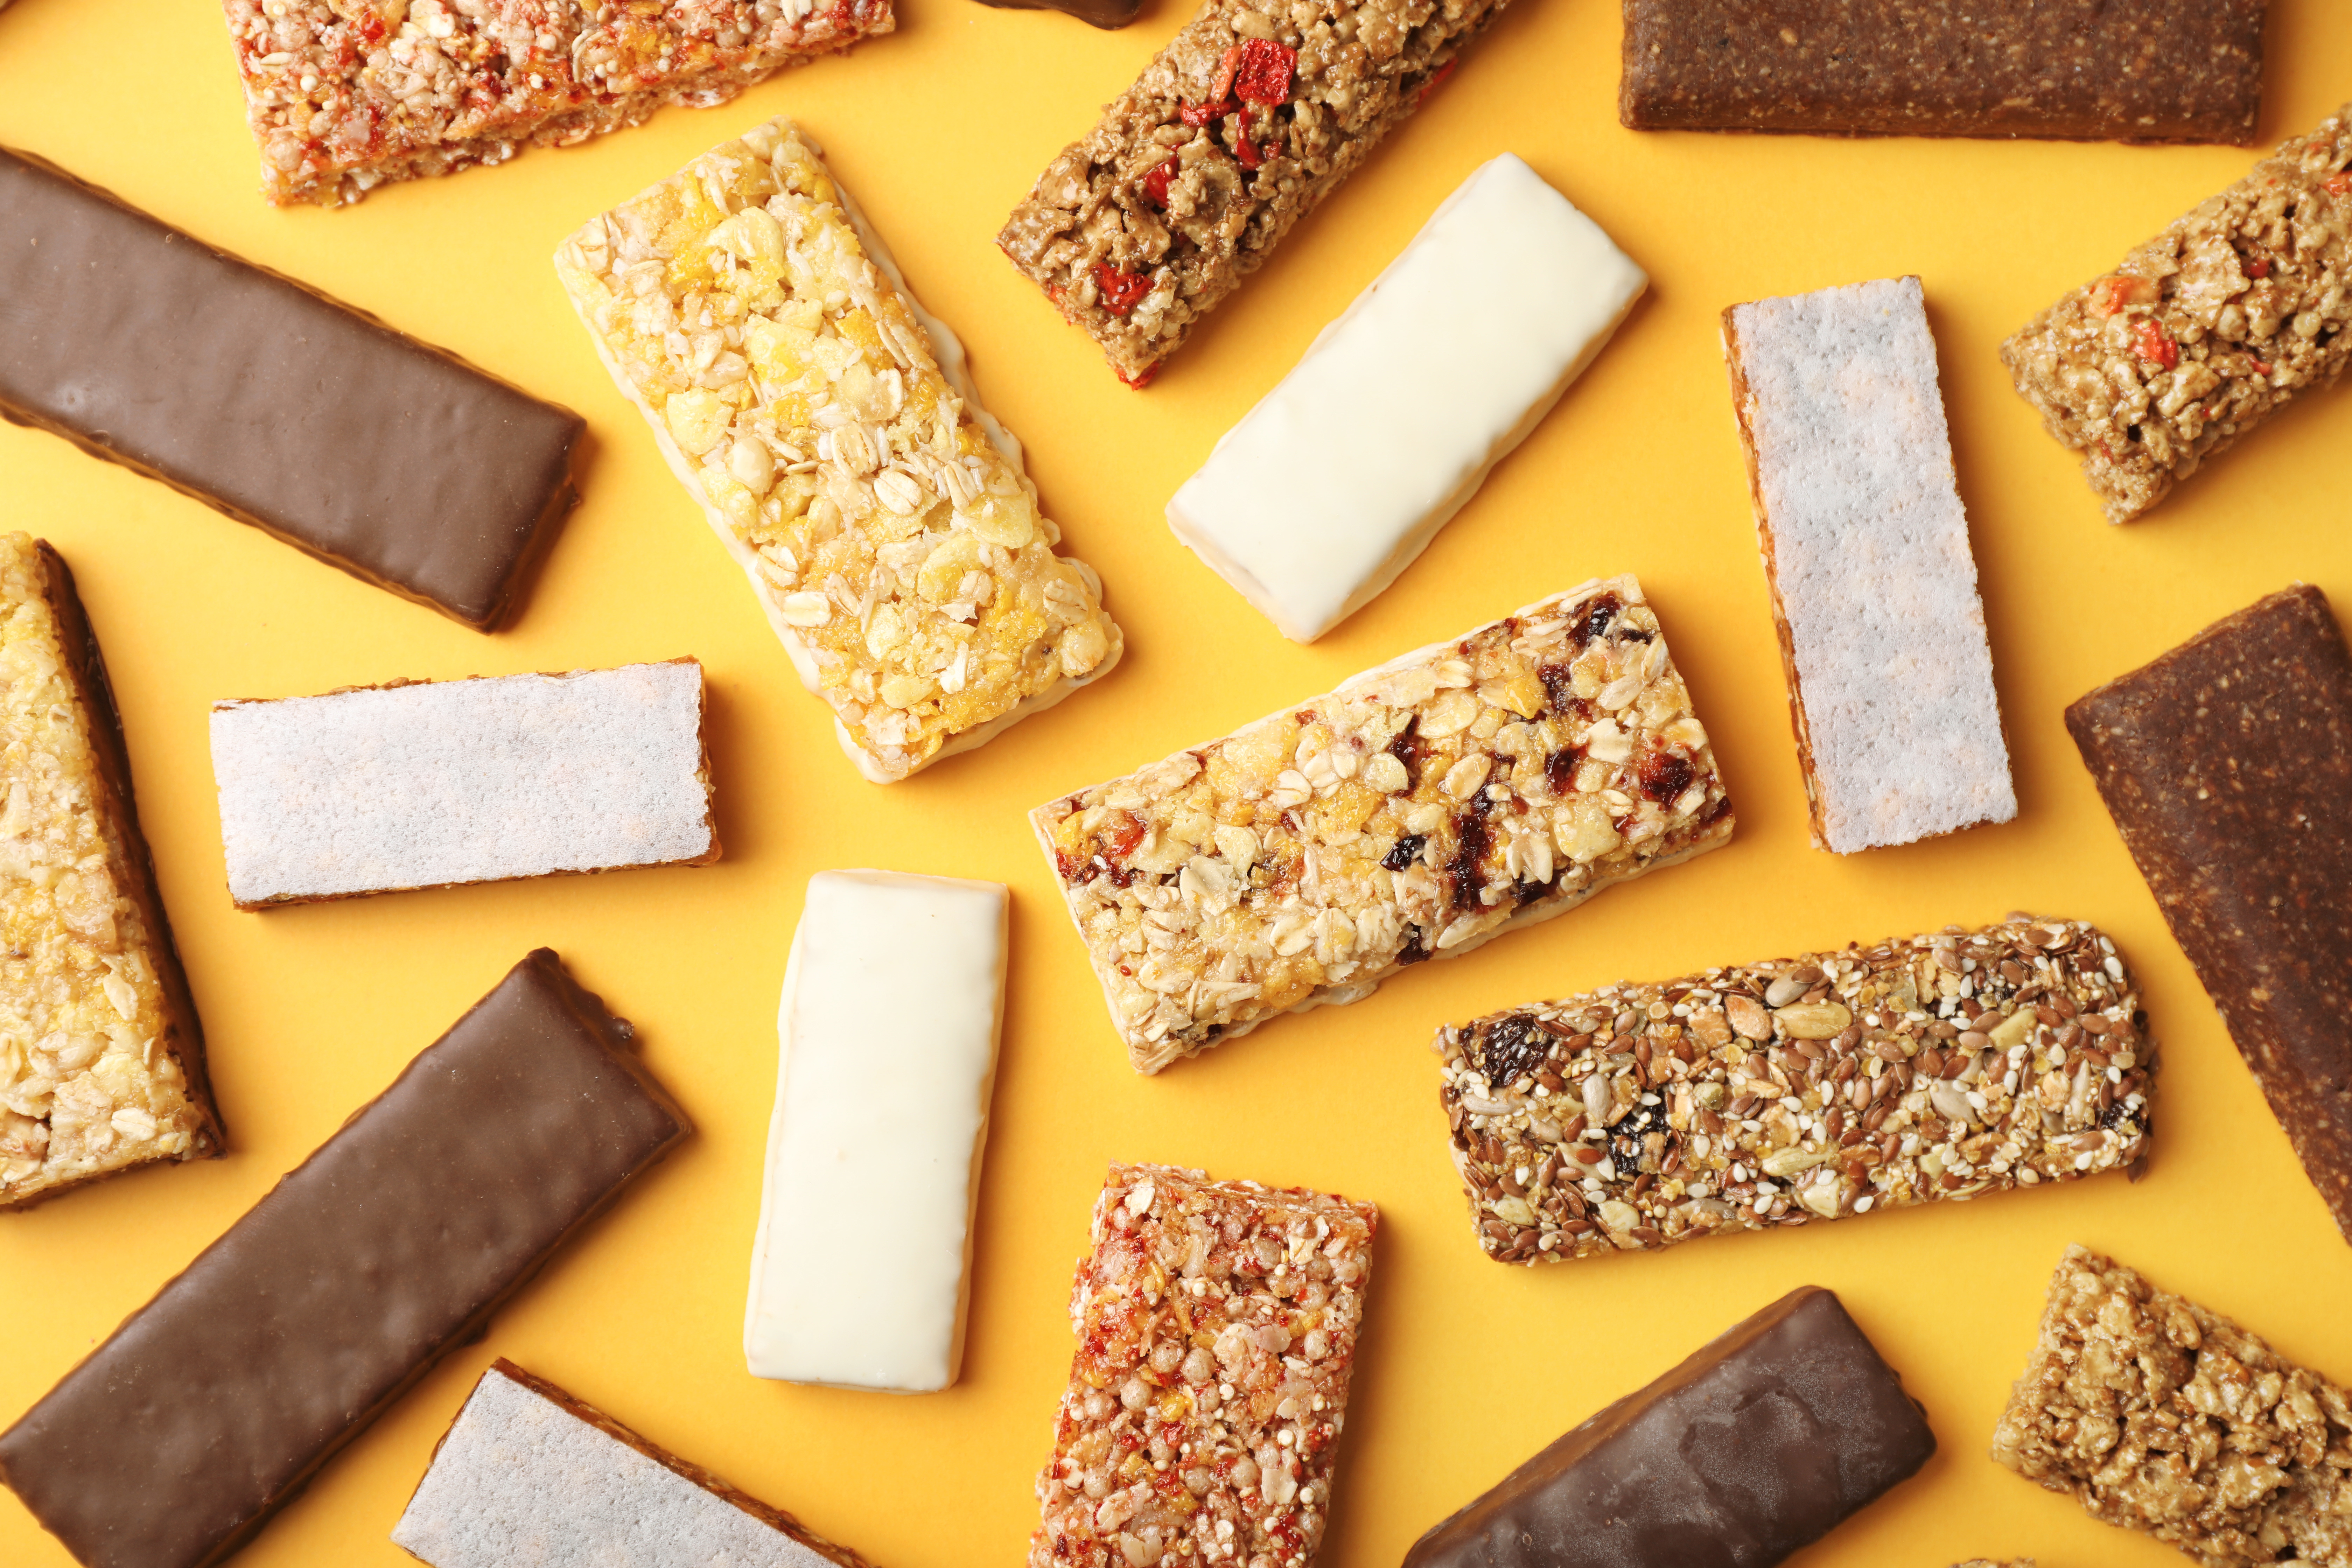 The Growth of the Energy Bar Market in Europe